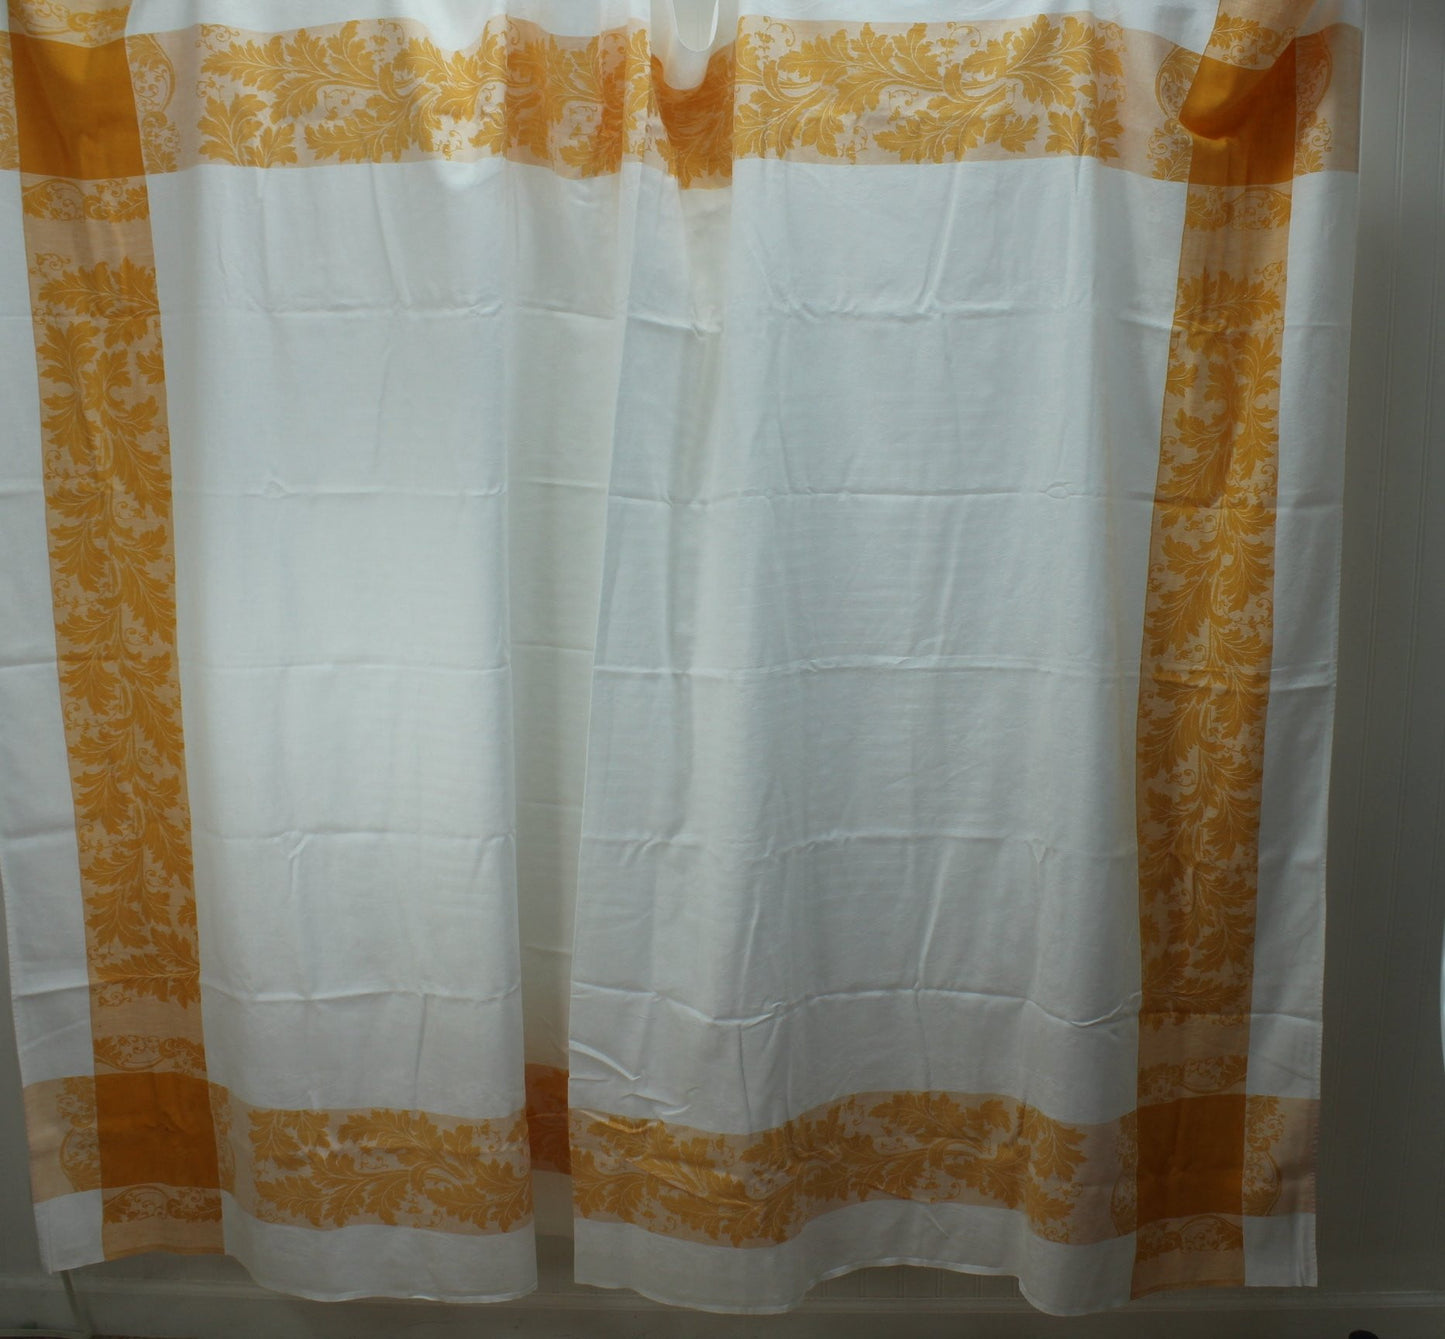 Damask Linen Tablecloth Vintage White Gold Leaves 60" X 82" Rectangle borders